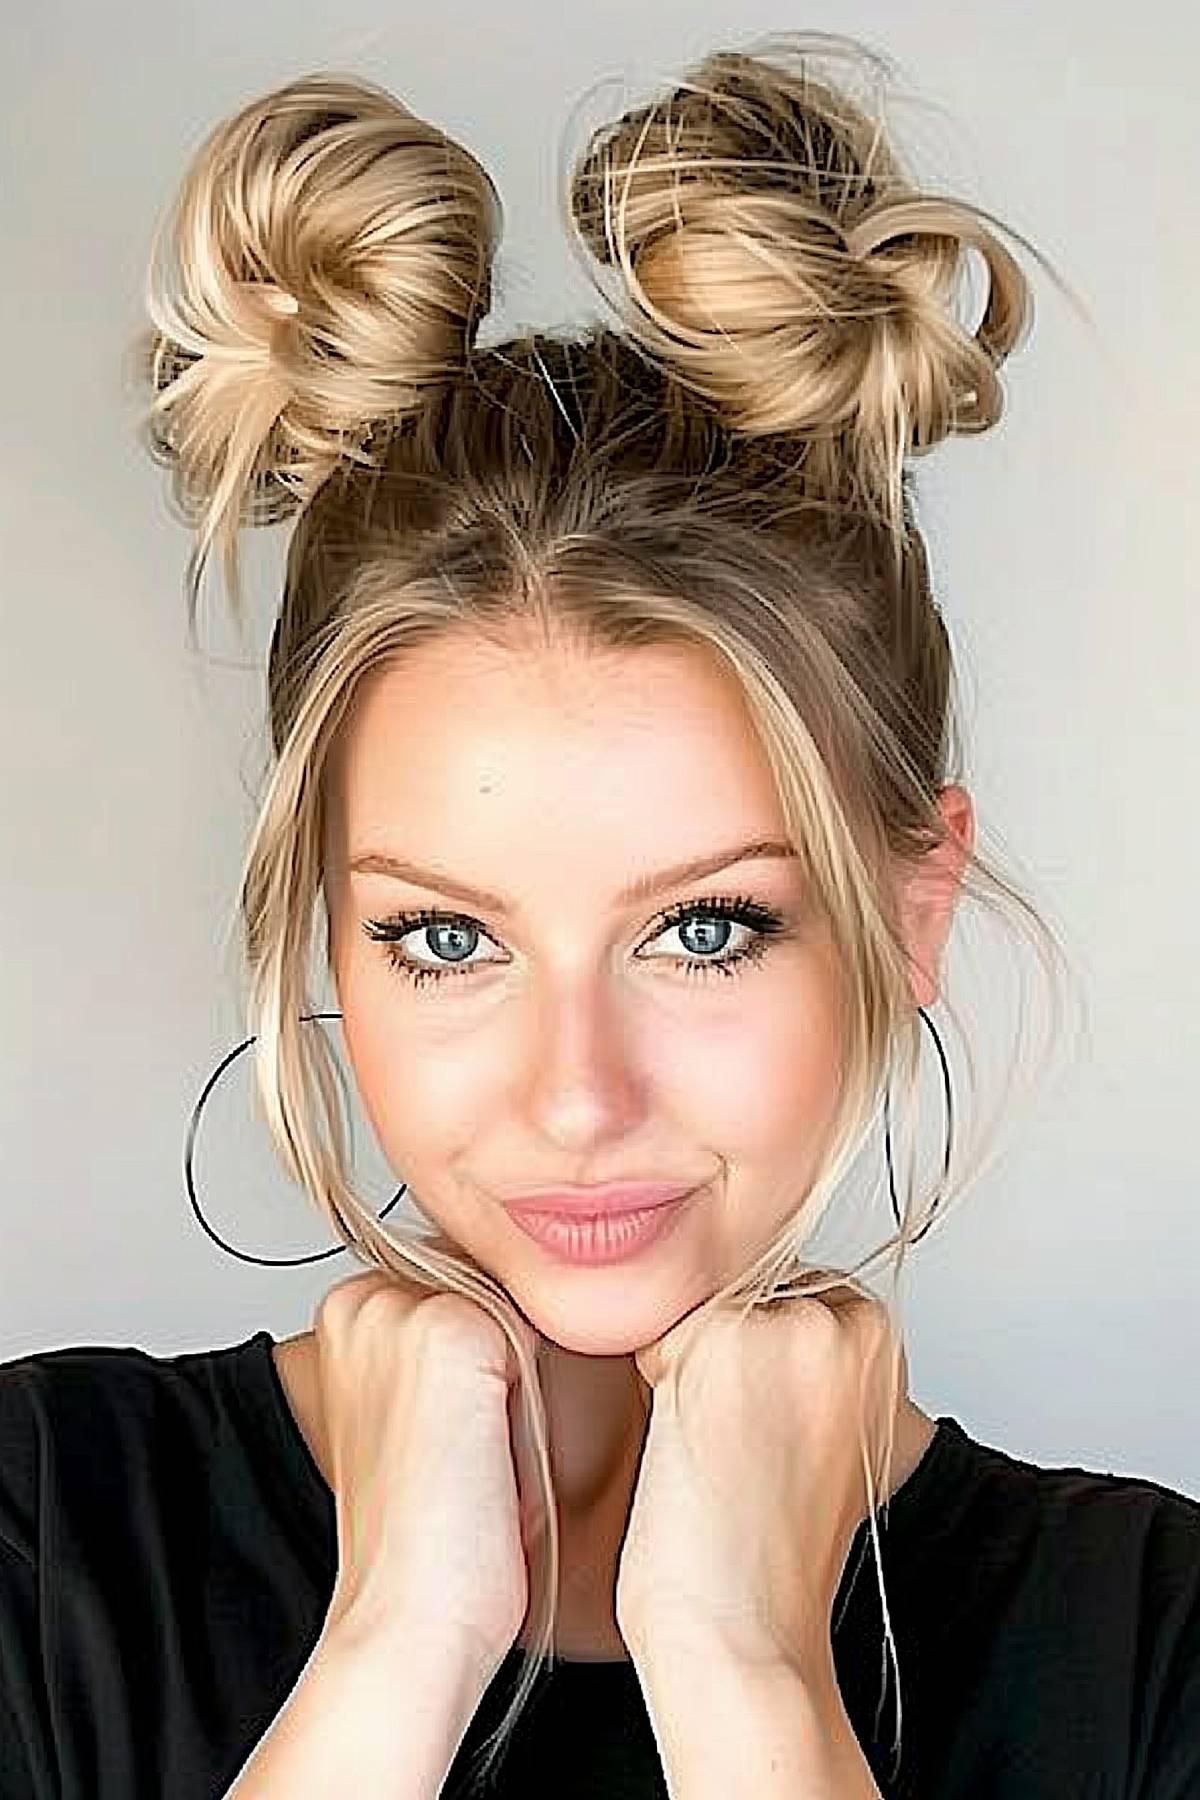 Charming bubble buns hairstyle for a playful and stylish updo perfect for medium-length hair.